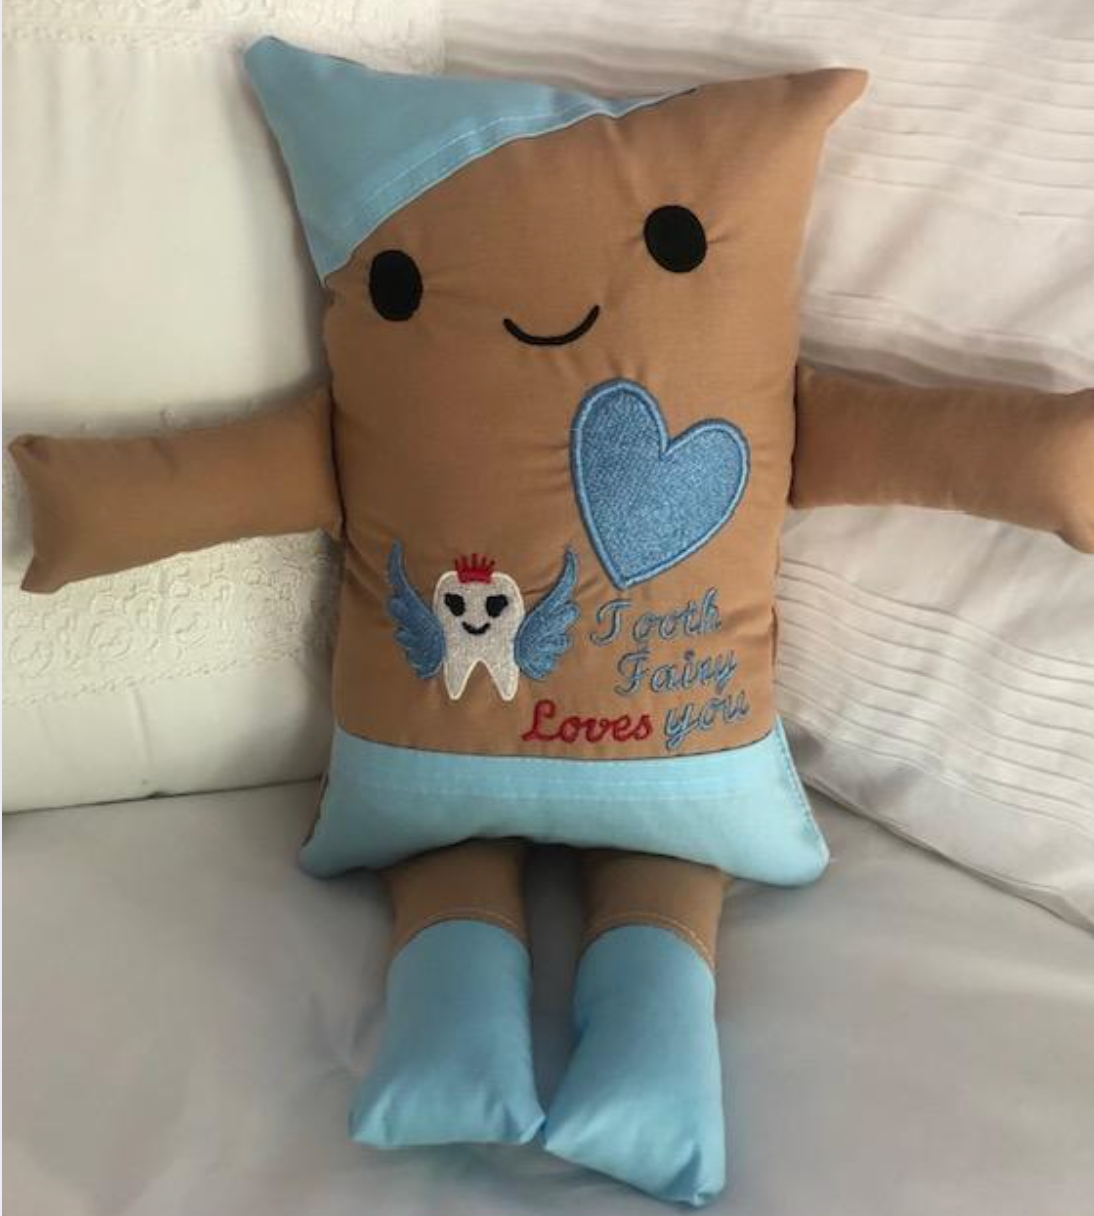 JJ Pillowdoll Tooth Fairy Loves You